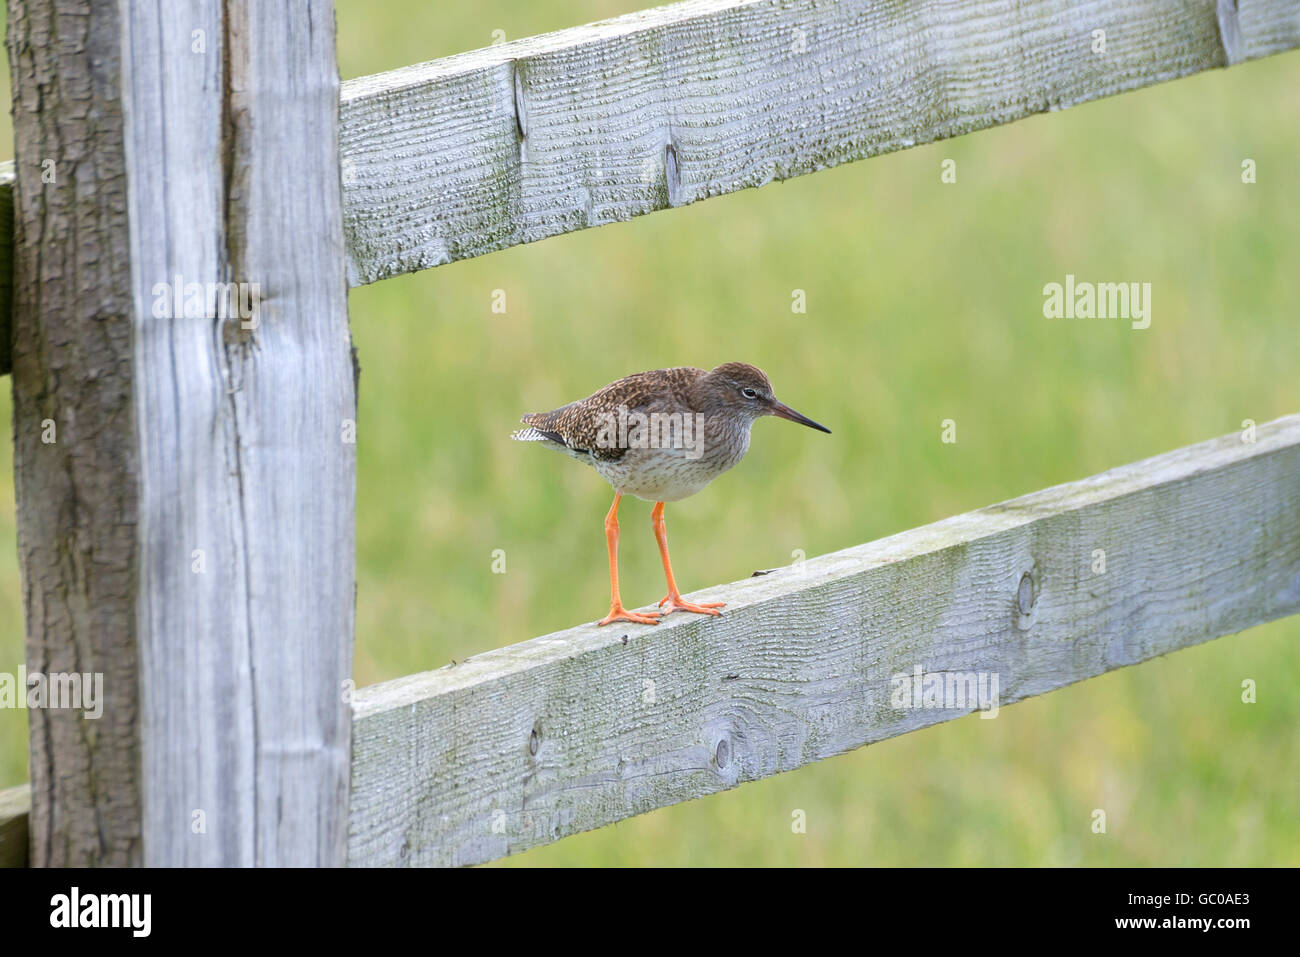 Common redshank bird perched on a wooden fence Stock Photo